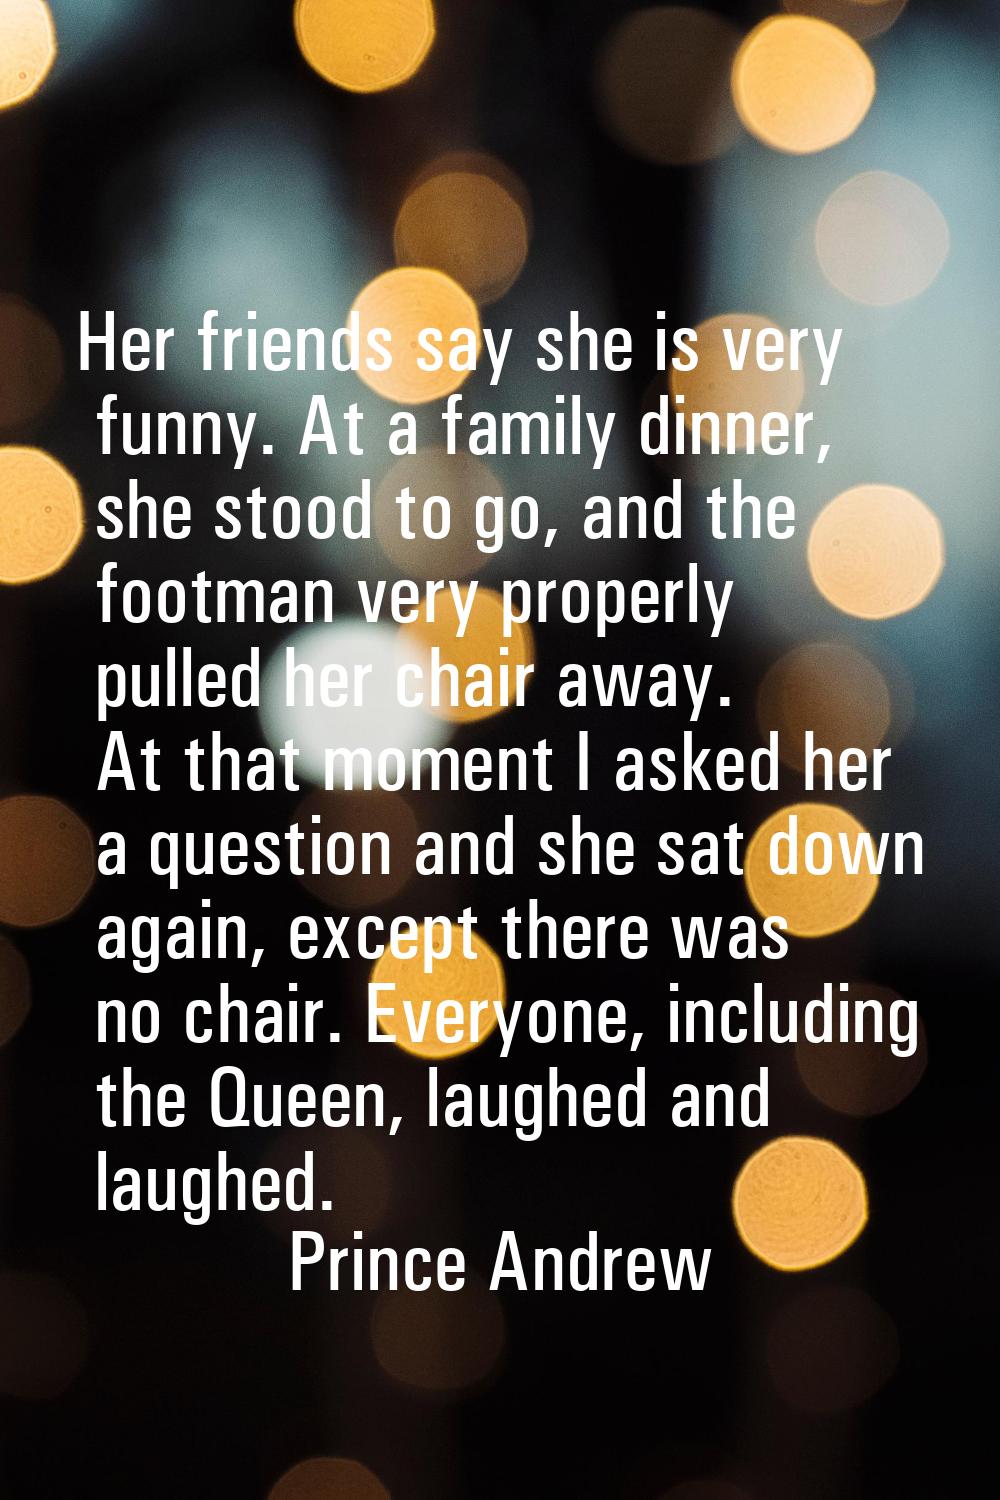 Her friends say she is very funny. At a family dinner, she stood to go, and the footman very proper